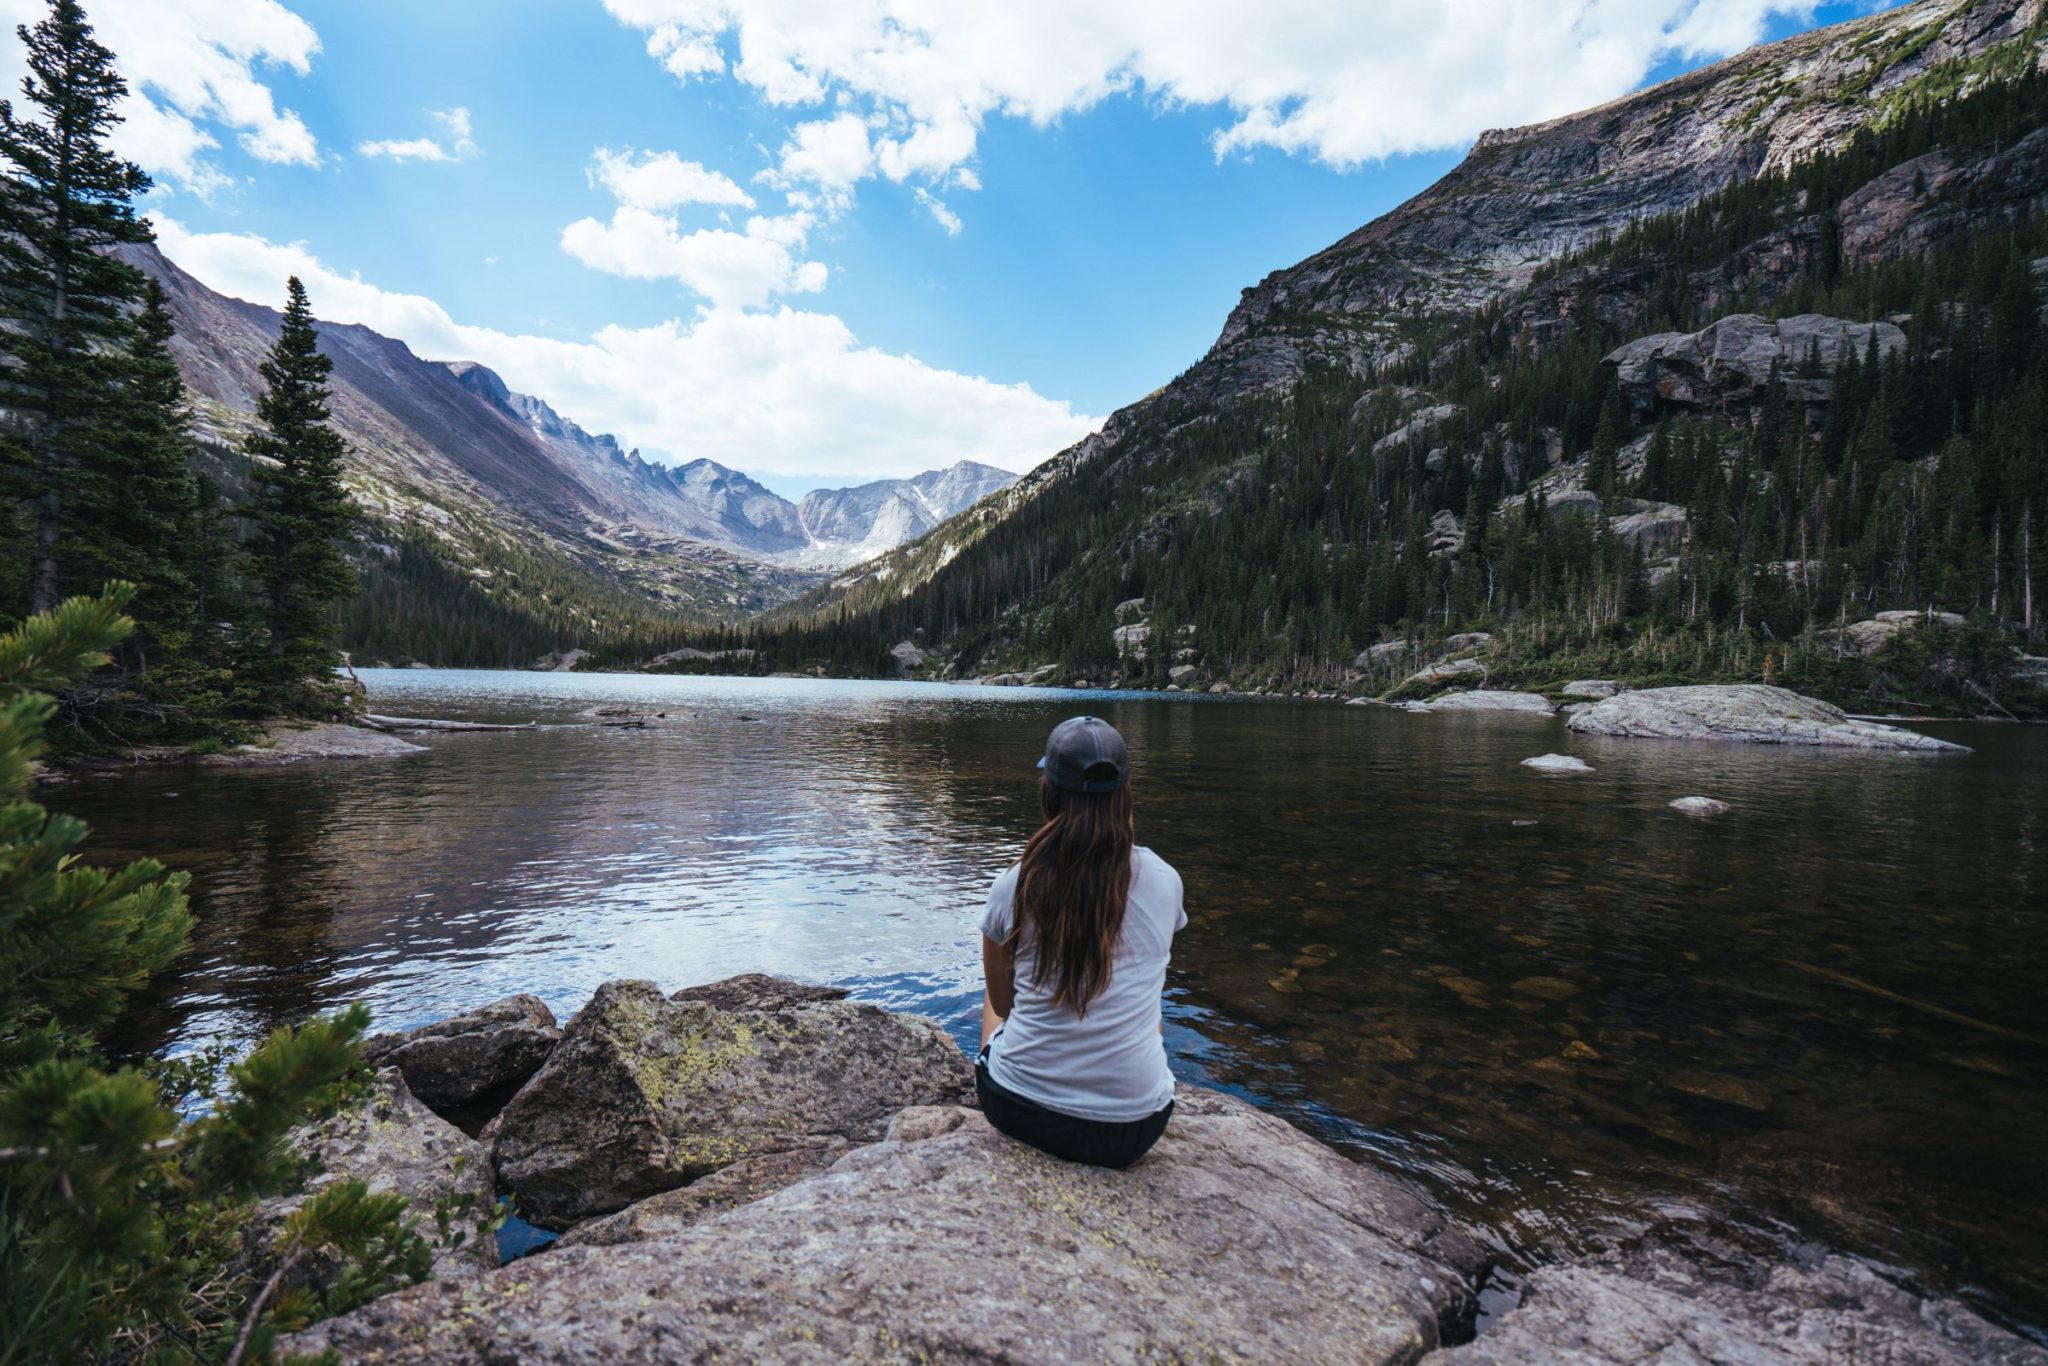 15 Best Hikes in Colorado » The Modern Female Hiker